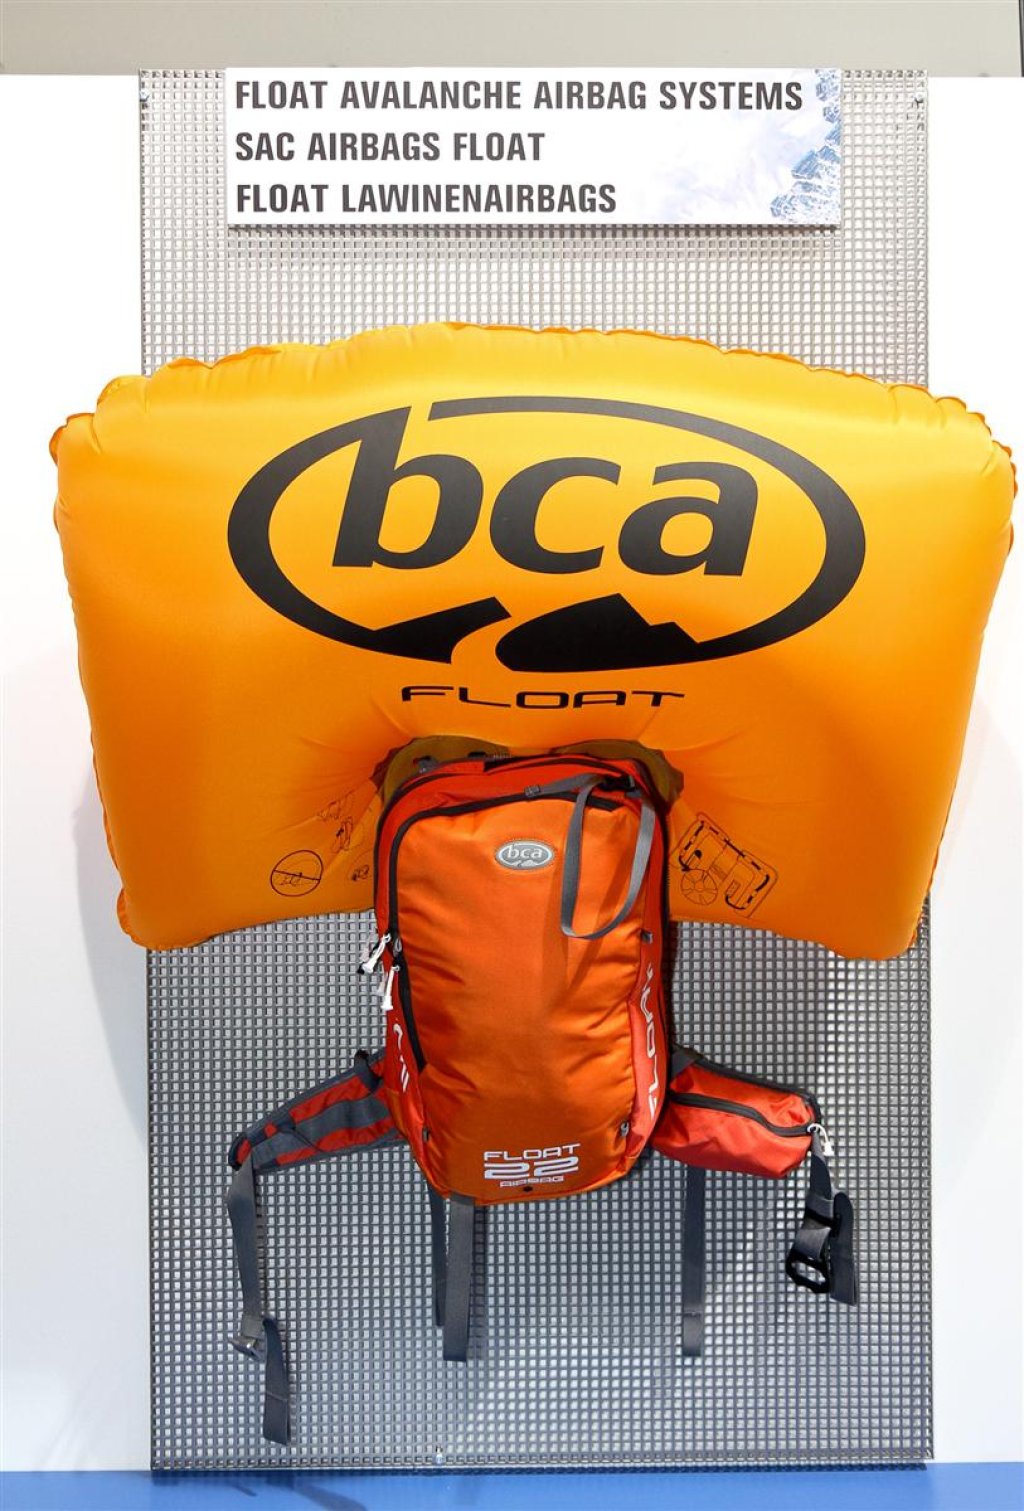 BCA: The third airbag system on the European market. Here the Float 22